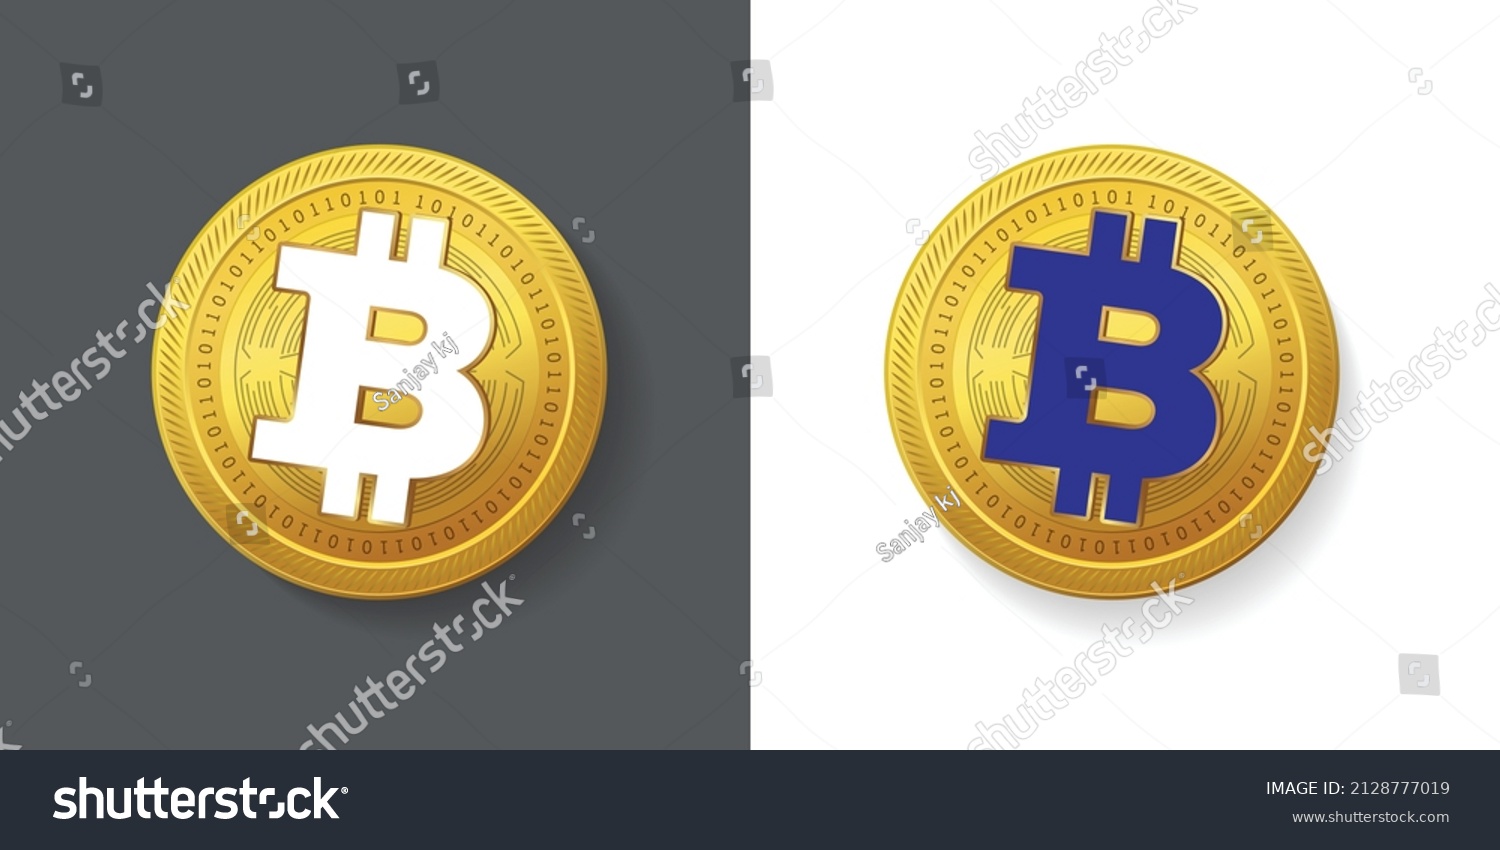 SVG of Bitcoin crypto currency logo, BTC coin logo on gold coins . isolated background of technology coin bitcoin logo in blue and white background. svg